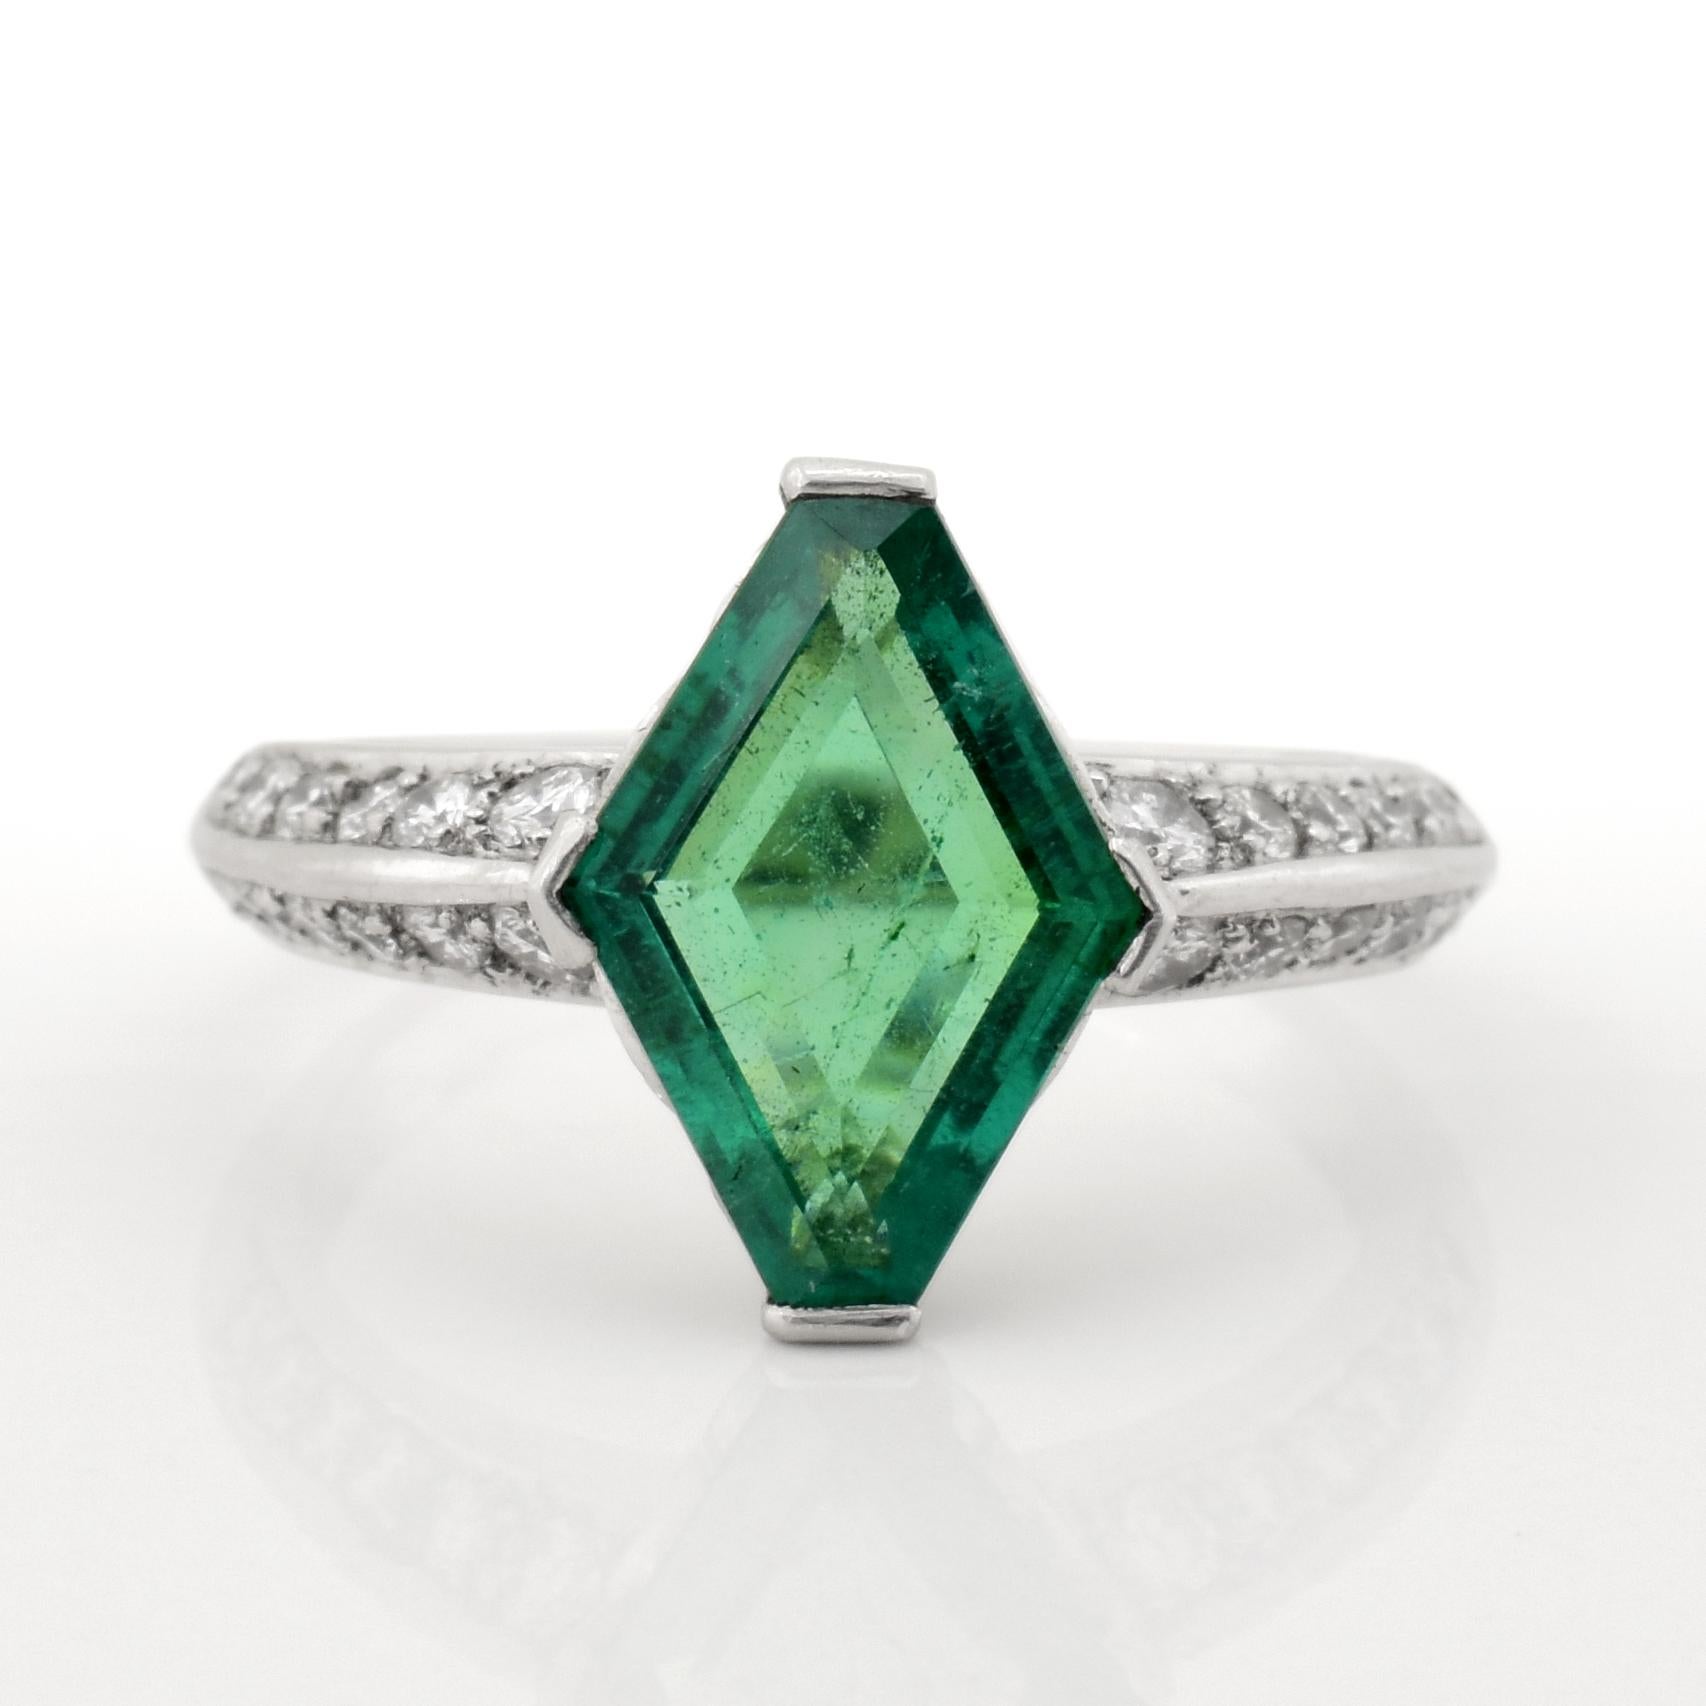 This ring is a modern piece with a deco flair. Featuring an approximately 3.00 carat lozenge cut emerald and approximately .50 carats in accent diamonds. The emerald is a light green hue that is vibrant and full of color. The ring is stamped with